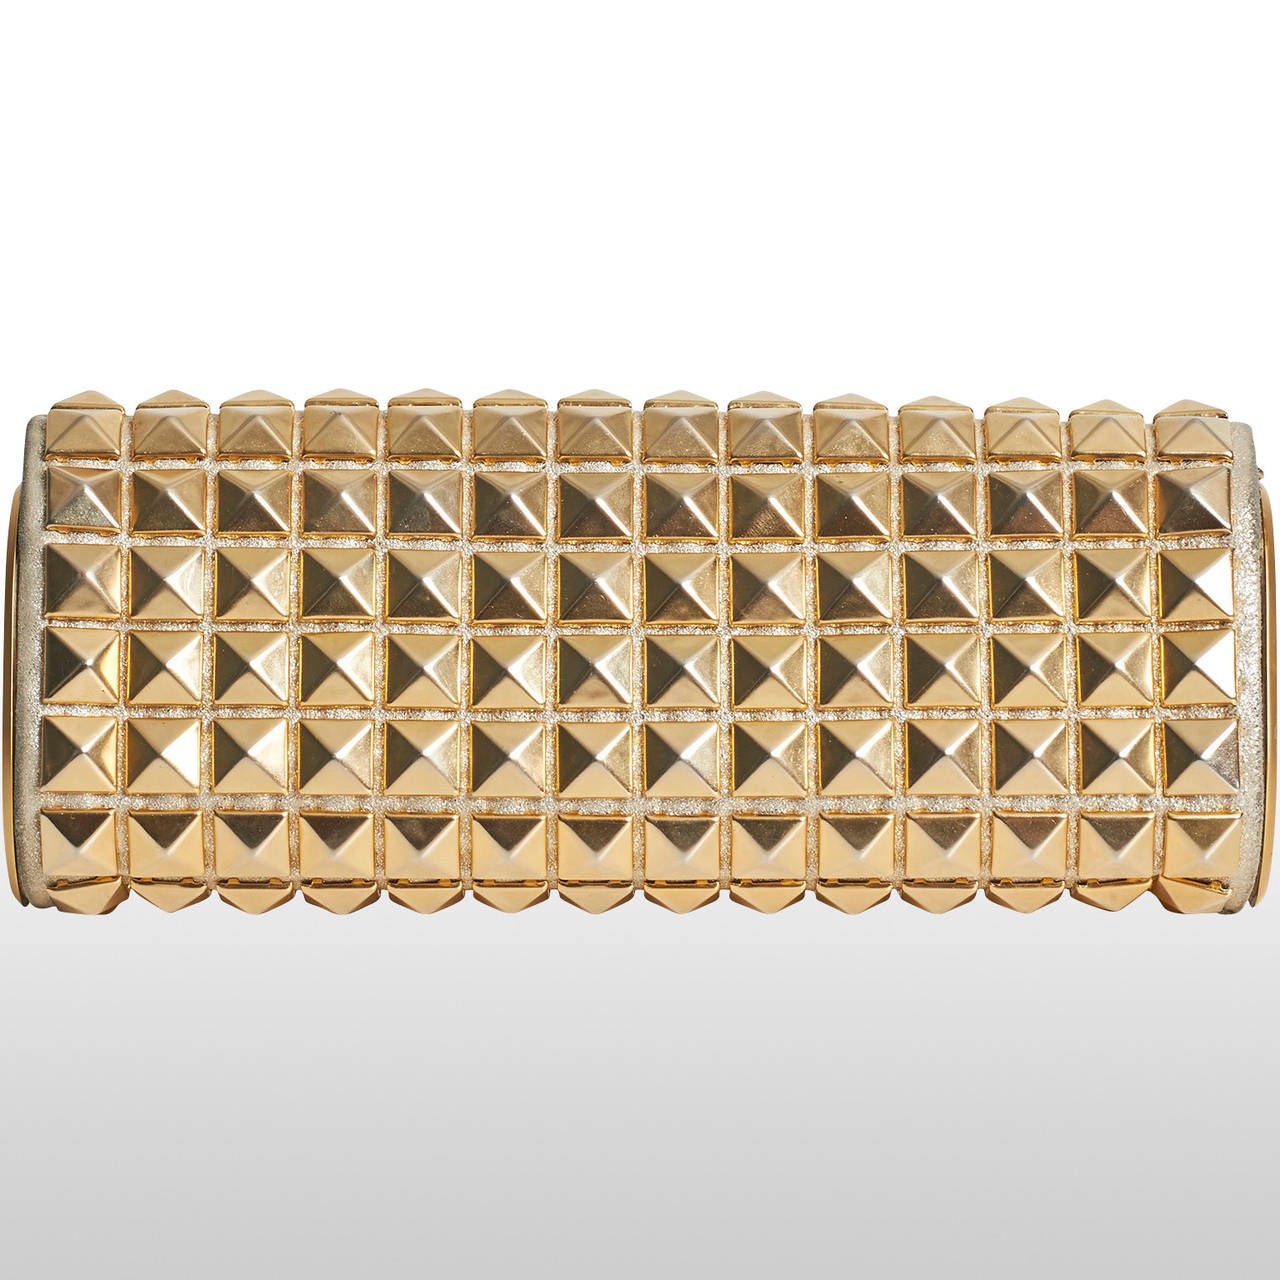 Jimmy Choo Gold Studded Tube Clutch In Excellent Condition For Sale In London, GB